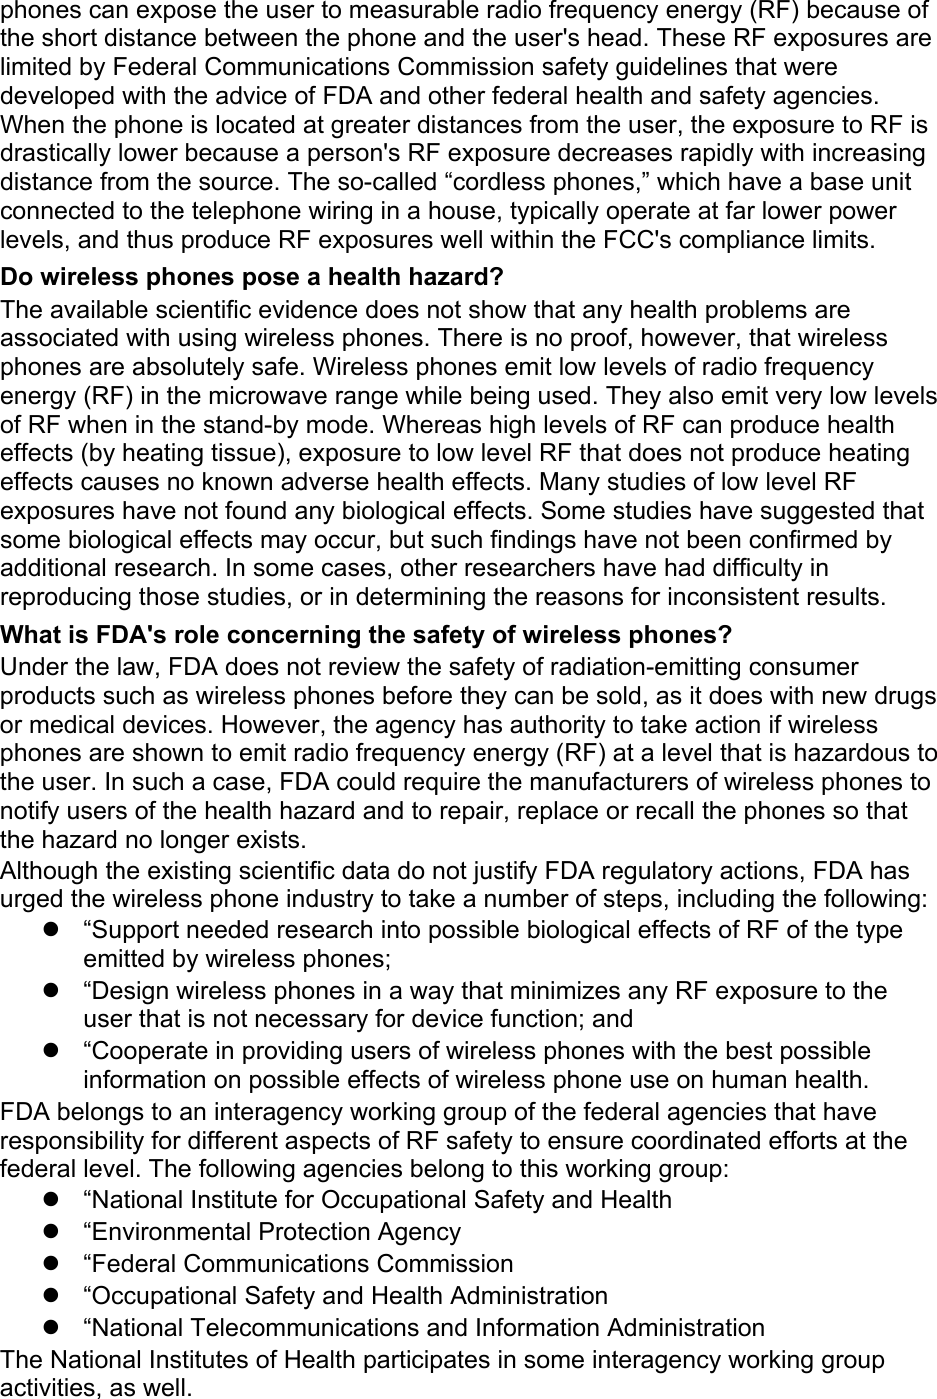 phones can expose the user to measurable radio frequency energy (RF) because of the short distance between the phone and the user&apos;s head. These RF exposures are limited by Federal Communications Commission safety guidelines that were developed with the advice of FDA and other federal health and safety agencies. When the phone is located at greater distances from the user, the exposure to RF is drastically lower because a person&apos;s RF exposure decreases rapidly with increasing distance from the source. The so-called “cordless phones,” which have a base unit connected to the telephone wiring in a house, typically operate at far lower power levels, and thus produce RF exposures well within the FCC&apos;s compliance limits. Do wireless phones pose a health hazard? The available scientific evidence does not show that any health problems are associated with using wireless phones. There is no proof, however, that wireless phones are absolutely safe. Wireless phones emit low levels of radio frequency energy (RF) in the microwave range while being used. They also emit very low levels of RF when in the stand-by mode. Whereas high levels of RF can produce health effects (by heating tissue), exposure to low level RF that does not produce heating effects causes no known adverse health effects. Many studies of low level RF exposures have not found any biological effects. Some studies have suggested that some biological effects may occur, but such findings have not been confirmed by additional research. In some cases, other researchers have had difficulty in reproducing those studies, or in determining the reasons for inconsistent results. What is FDA&apos;s role concerning the safety of wireless phones? Under the law, FDA does not review the safety of radiation-emitting consumer products such as wireless phones before they can be sold, as it does with new drugs or medical devices. However, the agency has authority to take action if wireless phones are shown to emit radio frequency energy (RF) at a level that is hazardous to the user. In such a case, FDA could require the manufacturers of wireless phones to notify users of the health hazard and to repair, replace or recall the phones so that the hazard no longer exists. Although the existing scientific data do not justify FDA regulatory actions, FDA has urged the wireless phone industry to take a number of steps, including the following:   “Support needed research into possible biological effects of RF of the type emitted by wireless phones;   “Design wireless phones in a way that minimizes any RF exposure to the user that is not necessary for device function; and   “Cooperate in providing users of wireless phones with the best possible information on possible effects of wireless phone use on human health. FDA belongs to an interagency working group of the federal agencies that have responsibility for different aspects of RF safety to ensure coordinated efforts at the federal level. The following agencies belong to this working group:   “National Institute for Occupational Safety and Health   “Environmental Protection Agency   “Federal Communications Commission   “Occupational Safety and Health Administration  “National Telecommunications and Information Administration The National Institutes of Health participates in some interagency working group activities, as well. 